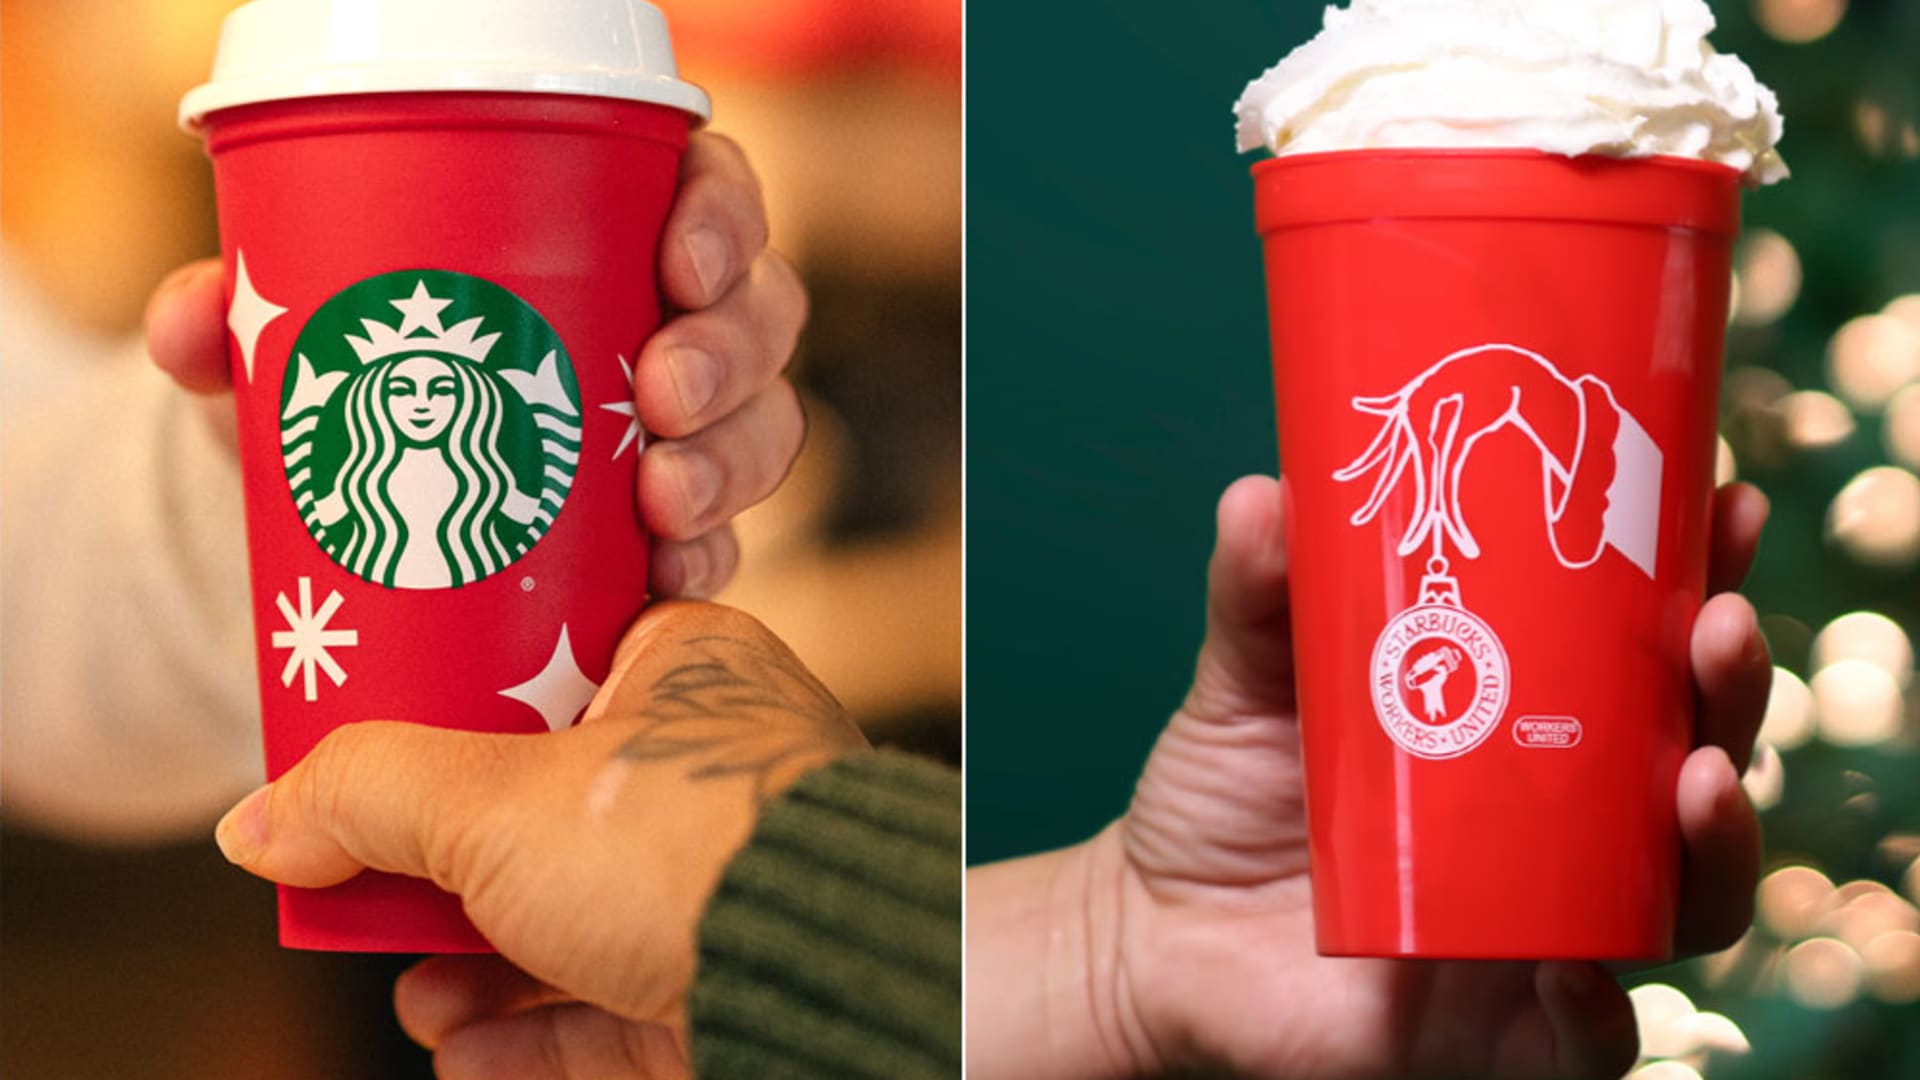 Starbucks Red Cups Through the Years